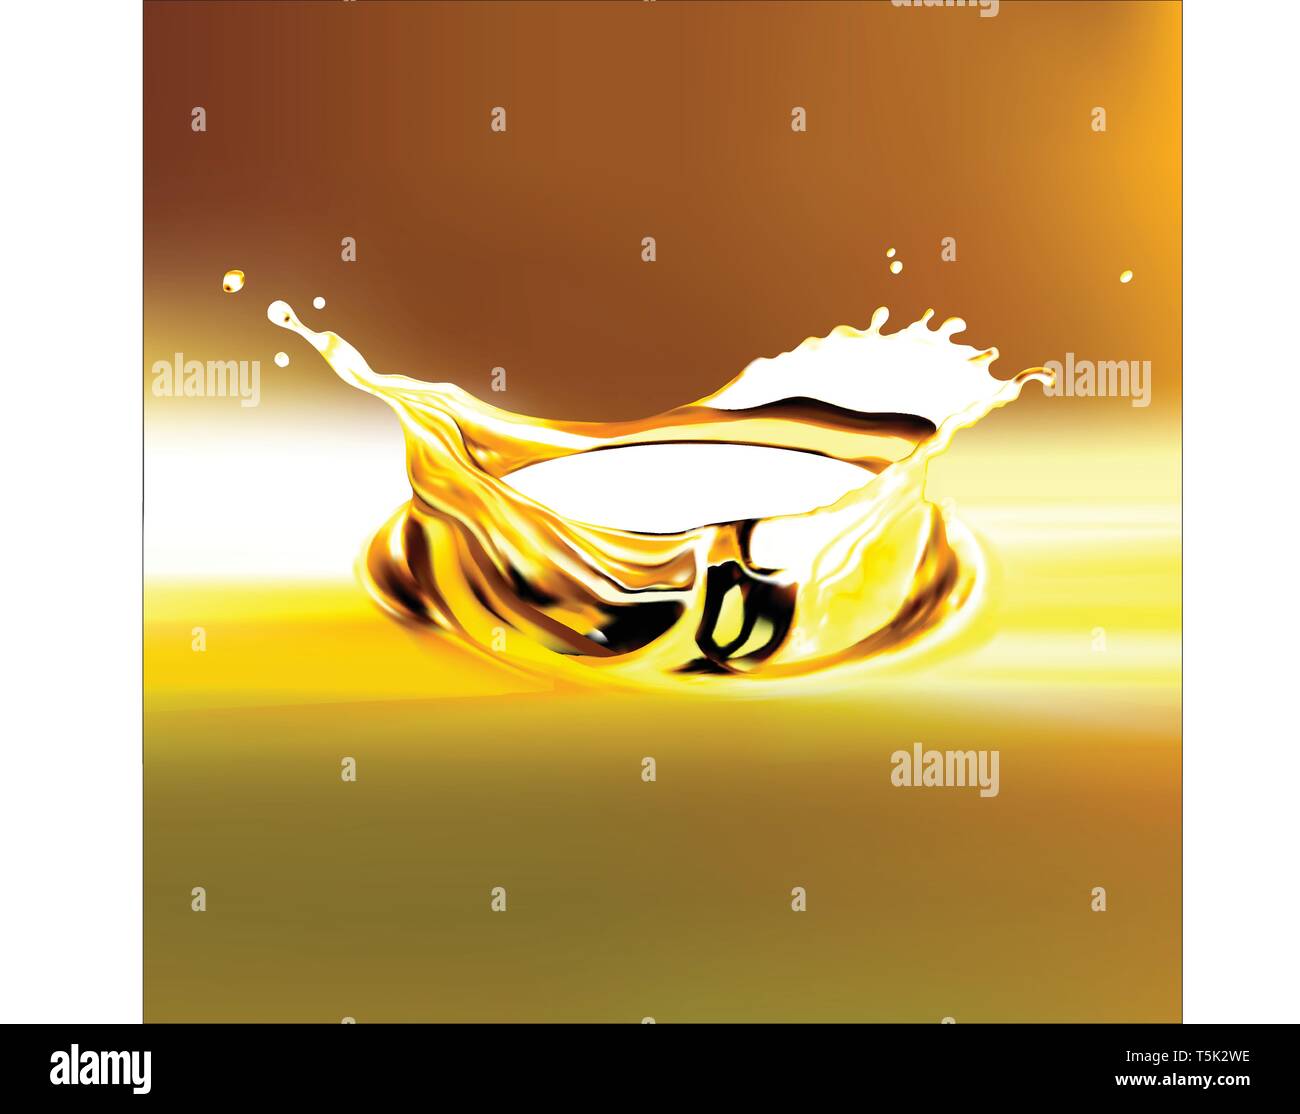 EPS 10. Gold olive or engine oil splash, 3d illustration with Clipping path. Stock Vector